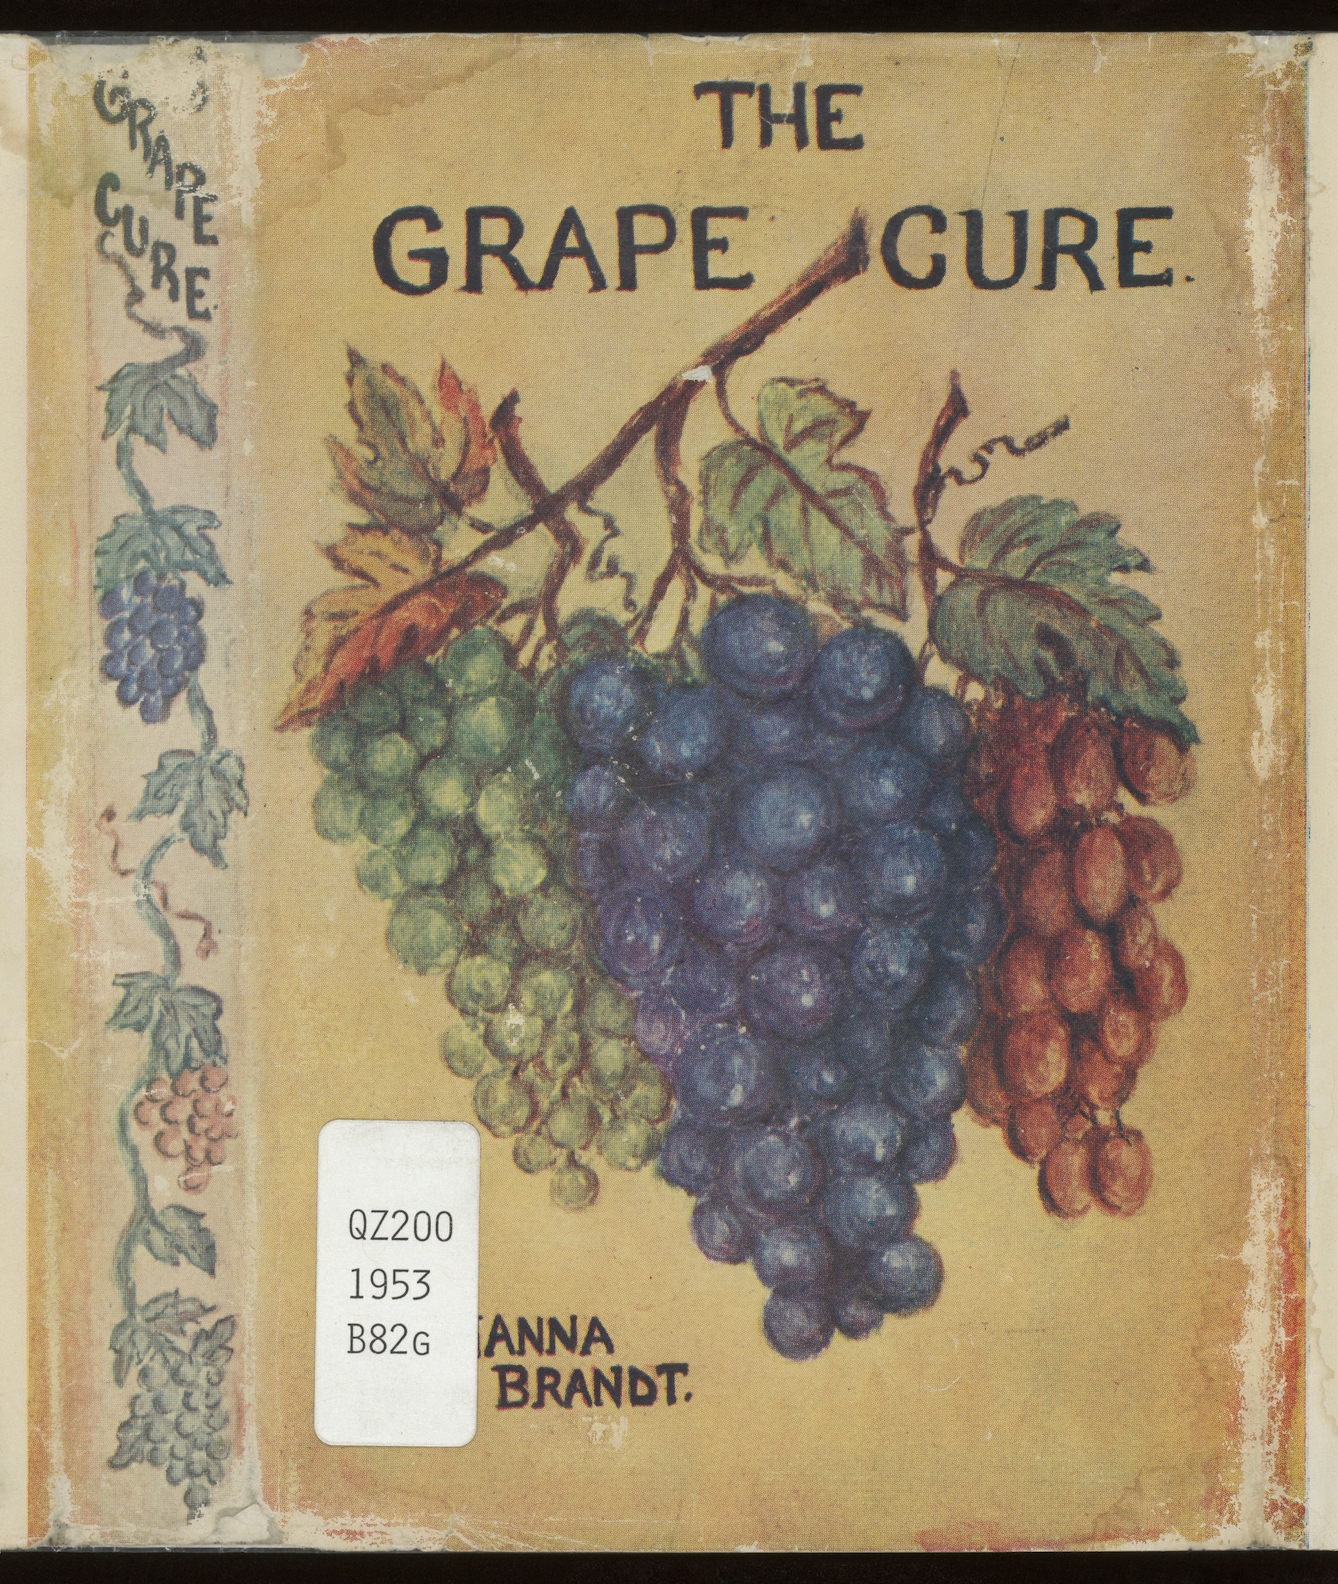 Cover of a book, 'The Grape Cure' by Joanna Brandt, featuring an illustration of three bunches of grapes: pale, red and purple.